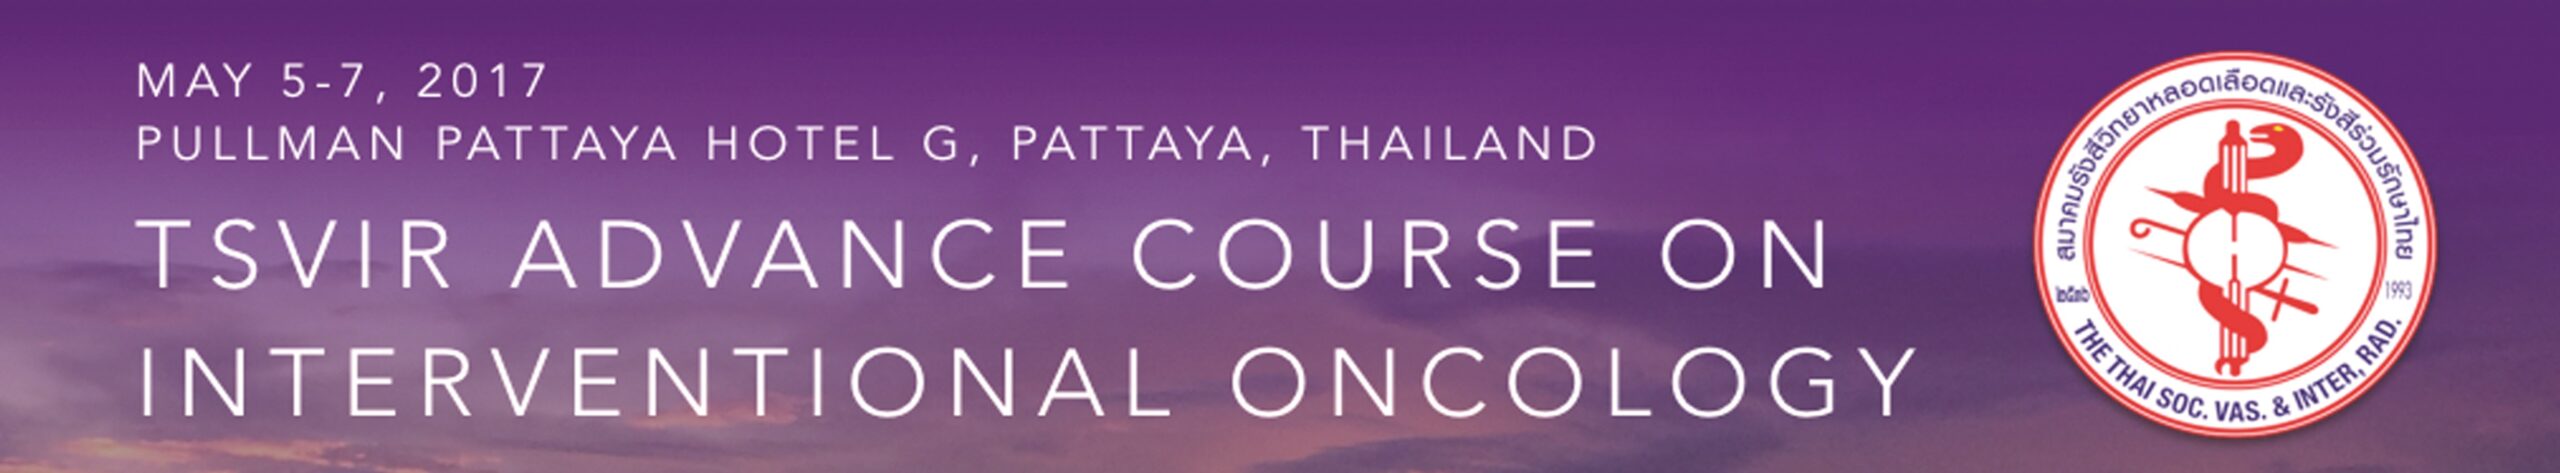 TSVIR Advance Course On Interventional Oncology